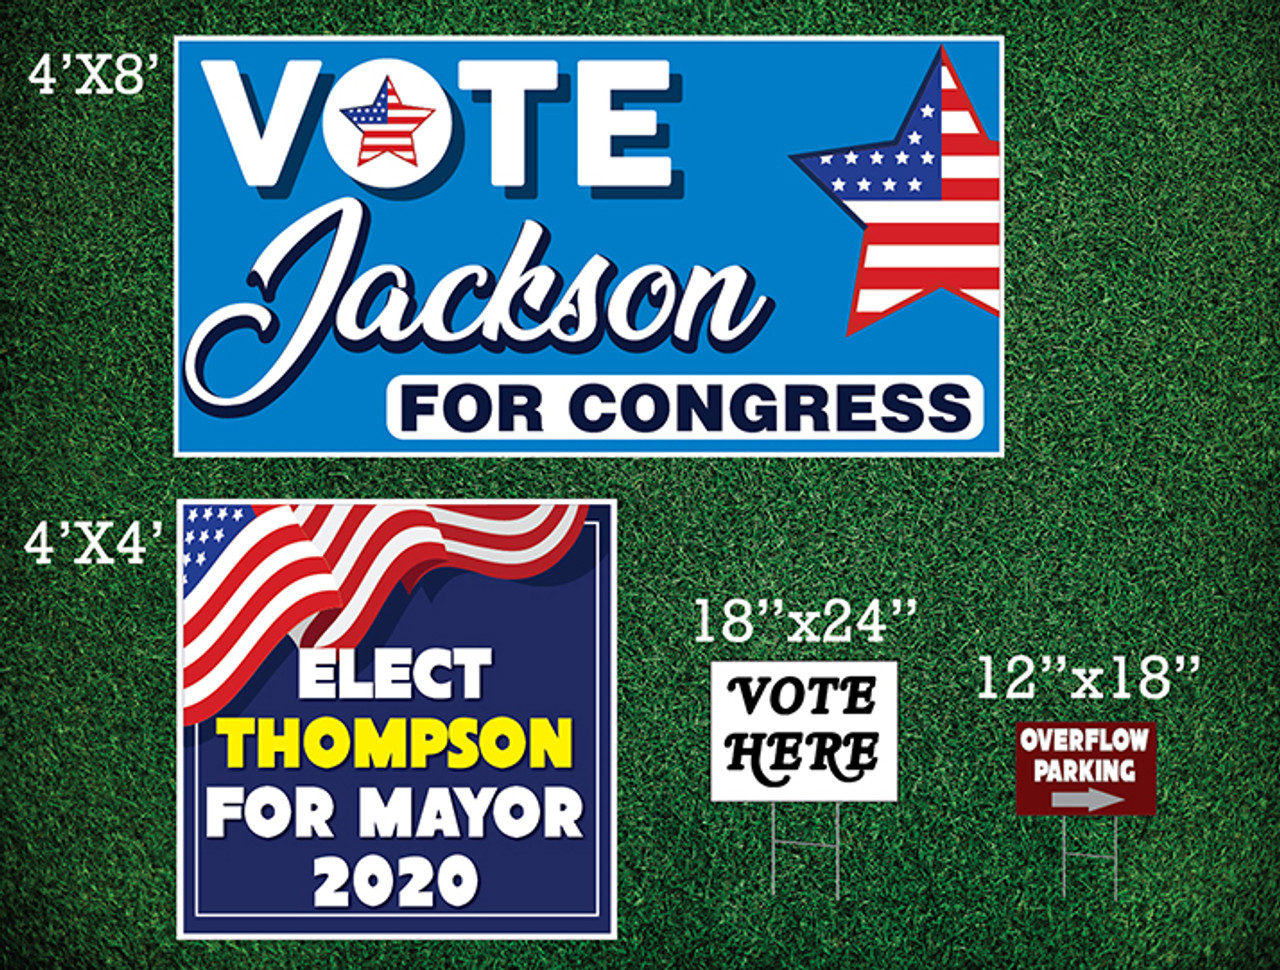 MAYOR ELECTION ELECT VOTE CUSTOM PERSONALIZED Banner Sign 2' x 4' w/ 4 Grommets 